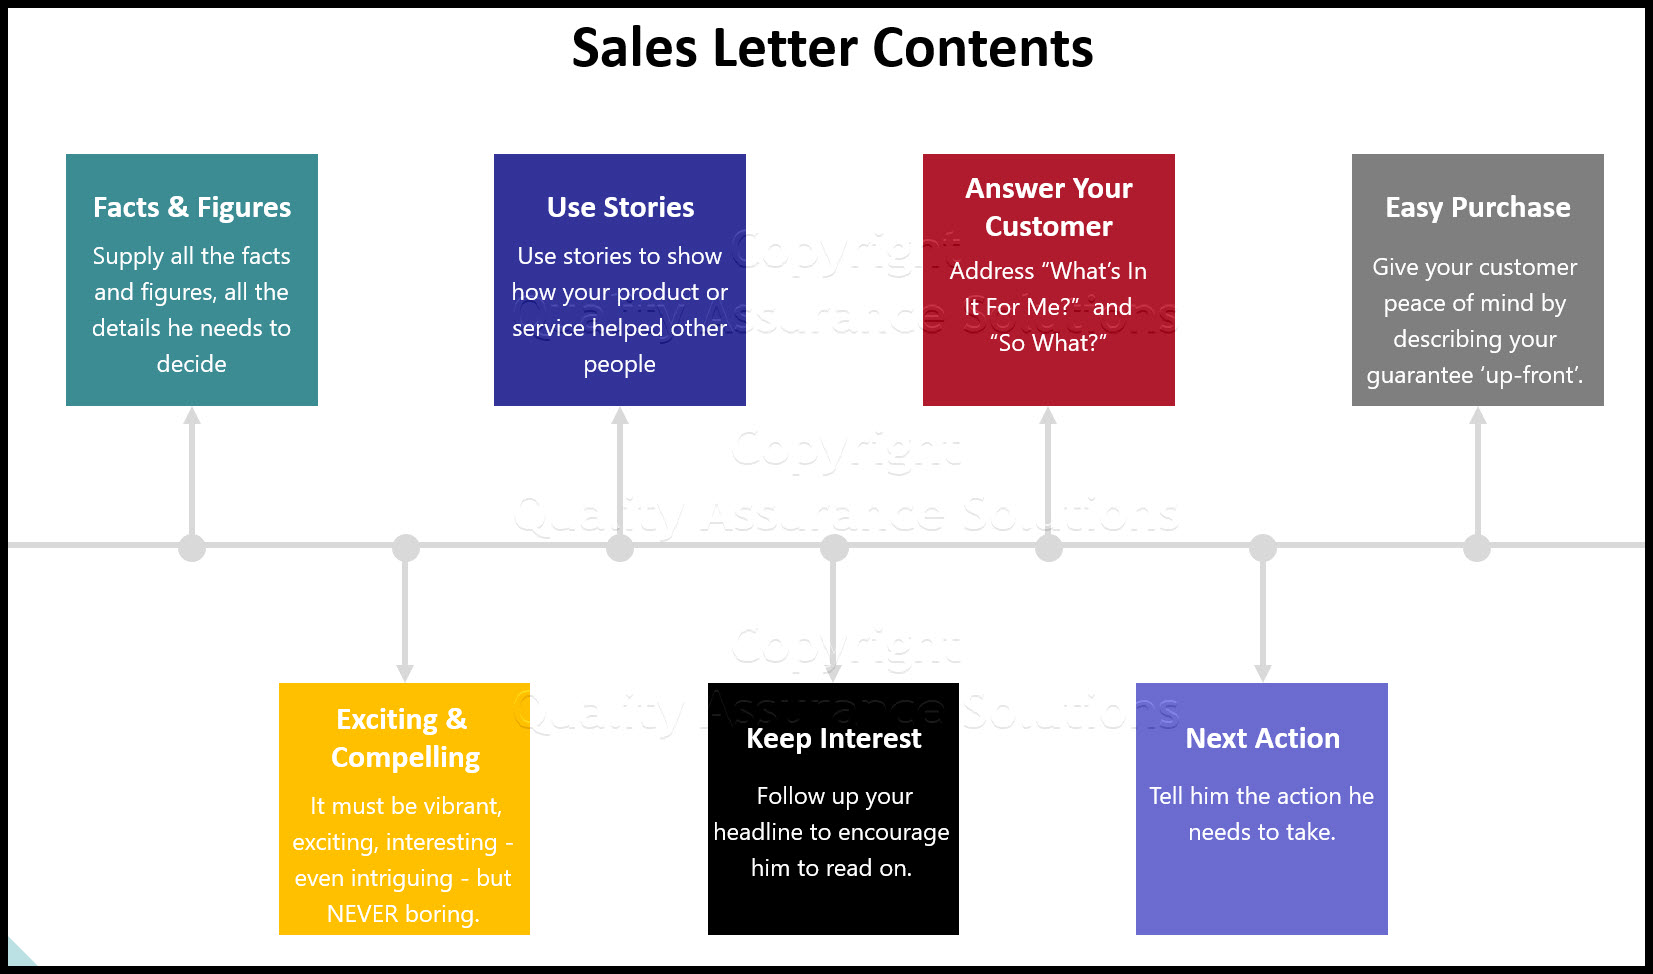 The more you tell the more you sell, important lessons to know for your sales letter format.